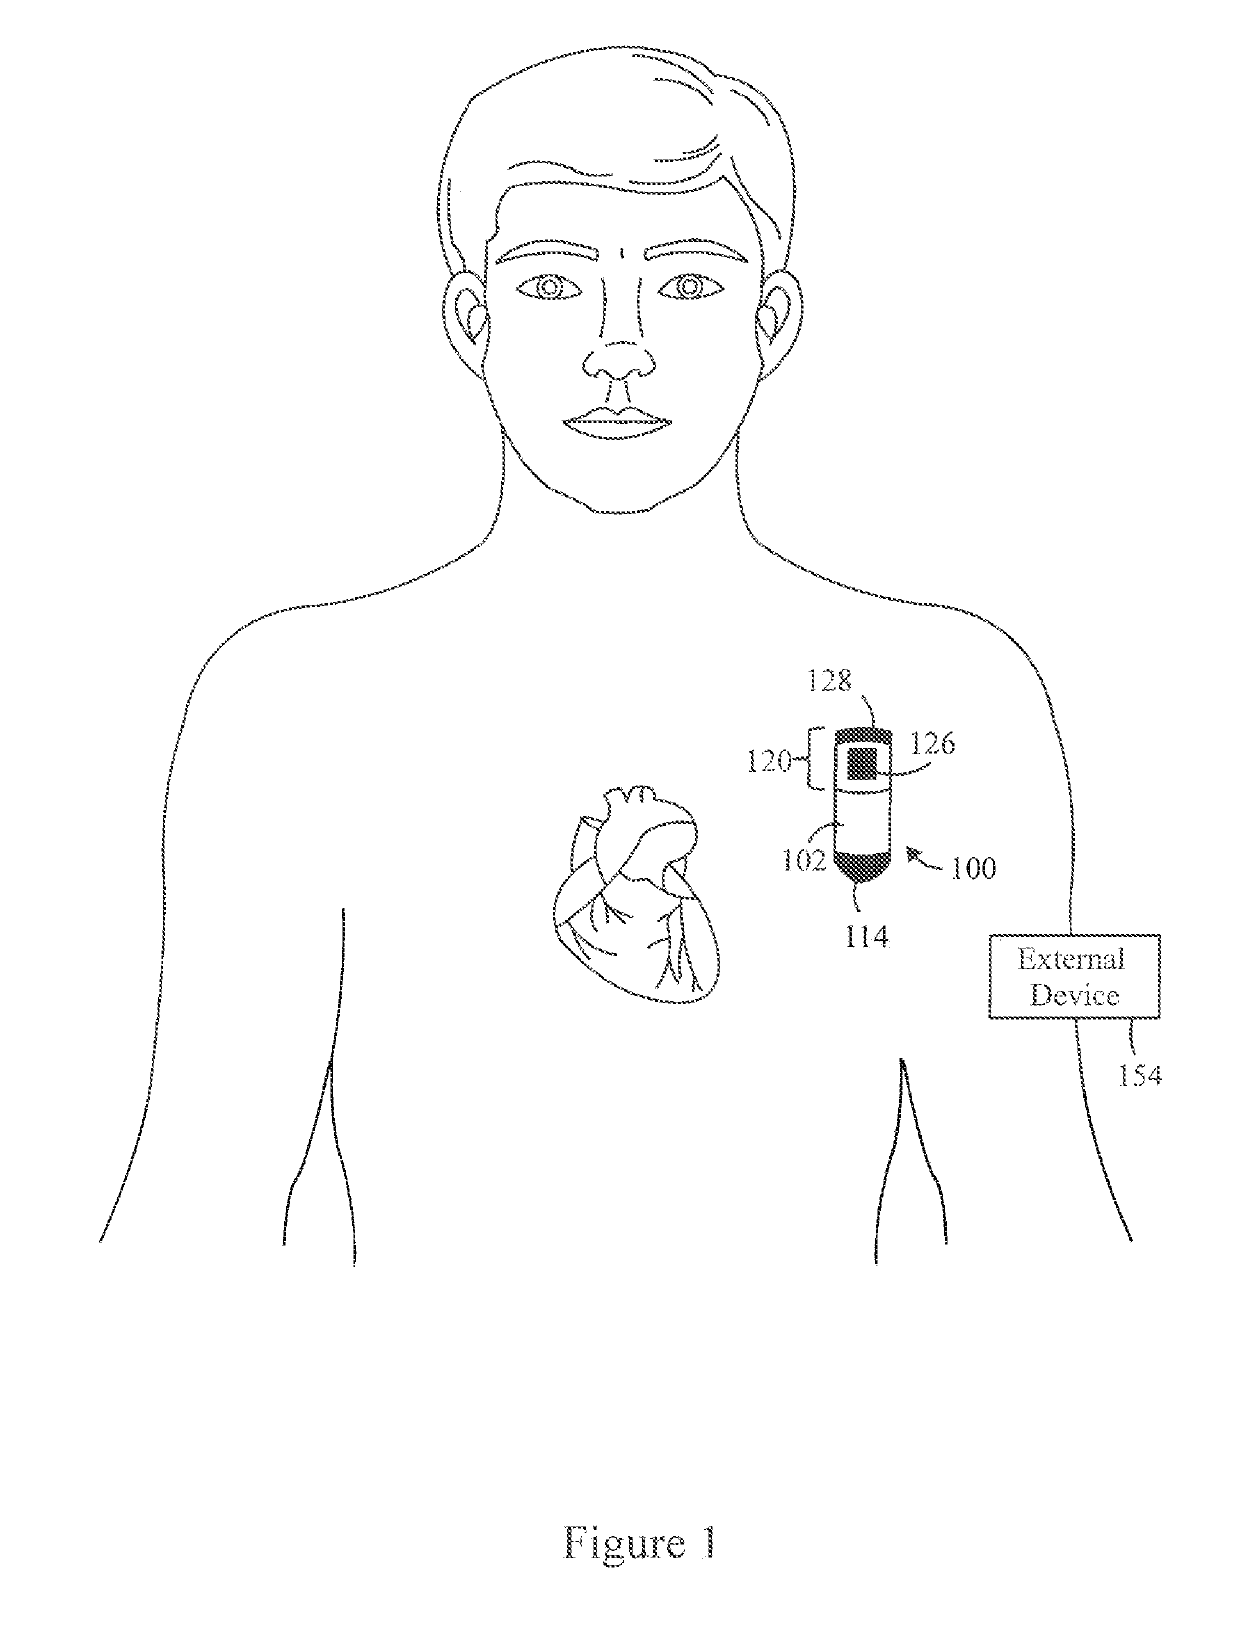 Method And System For Second Pass Confirmation Of Detected Cardiac Arrhythmic Patterns